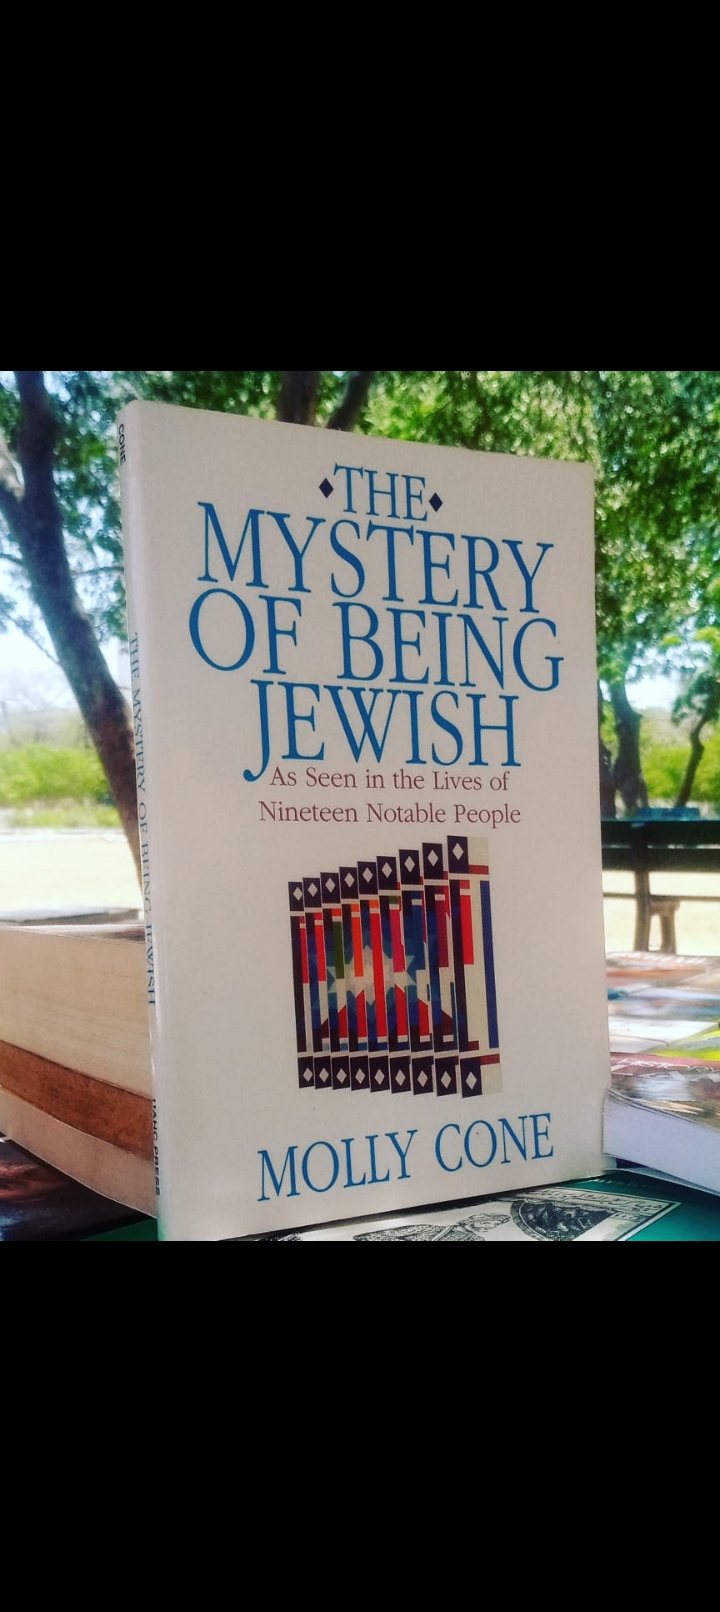 the mystery of being jewish.as seen in the lives of nineteen notable people by molly cone. original 